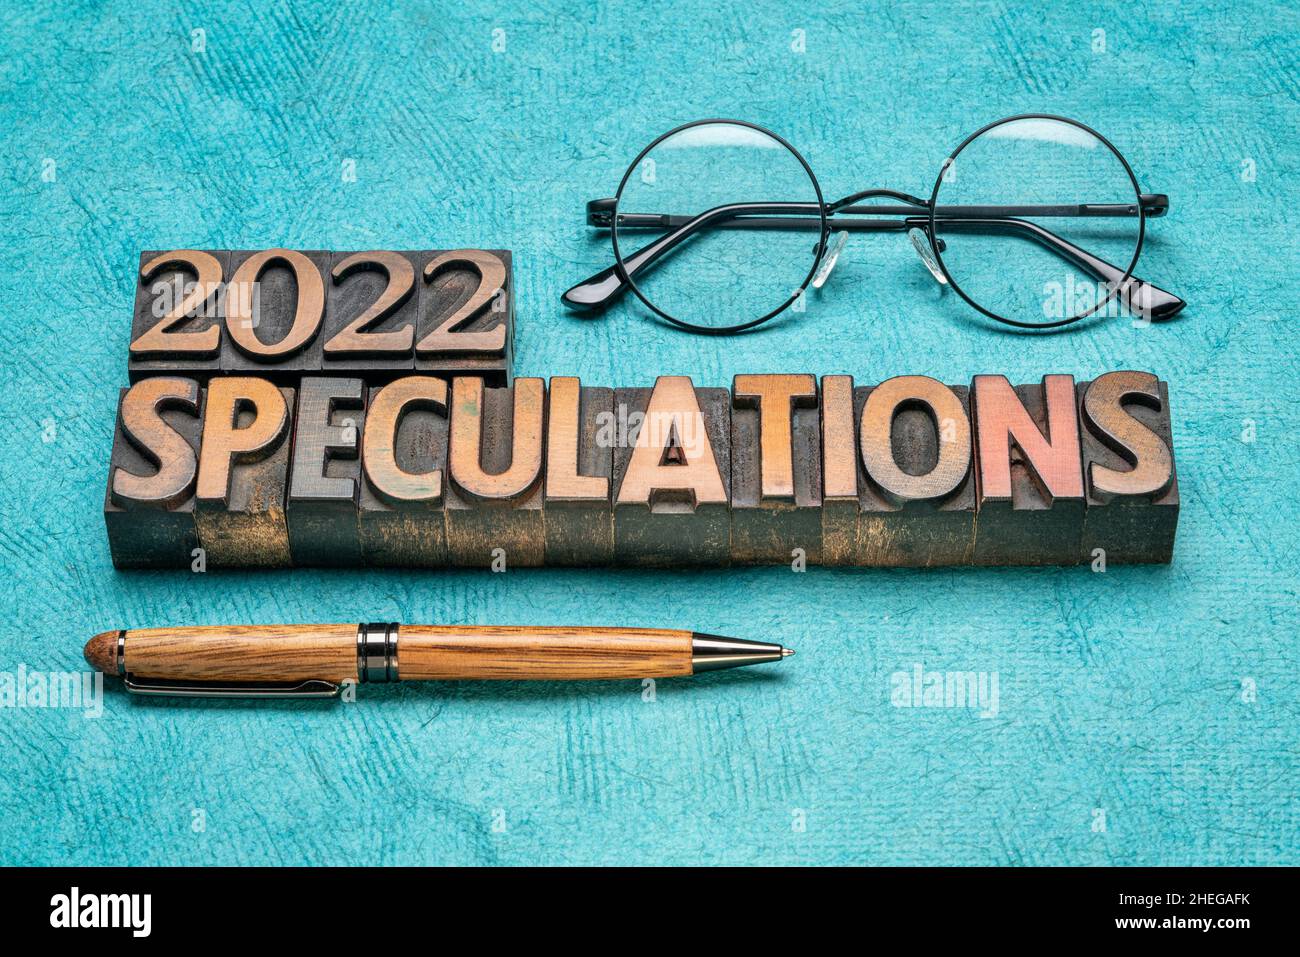 2022 year speculations concept - text in vintage letterpress wood type printing blocks with reading glasses, expectations and predictions for the New Stock Photo